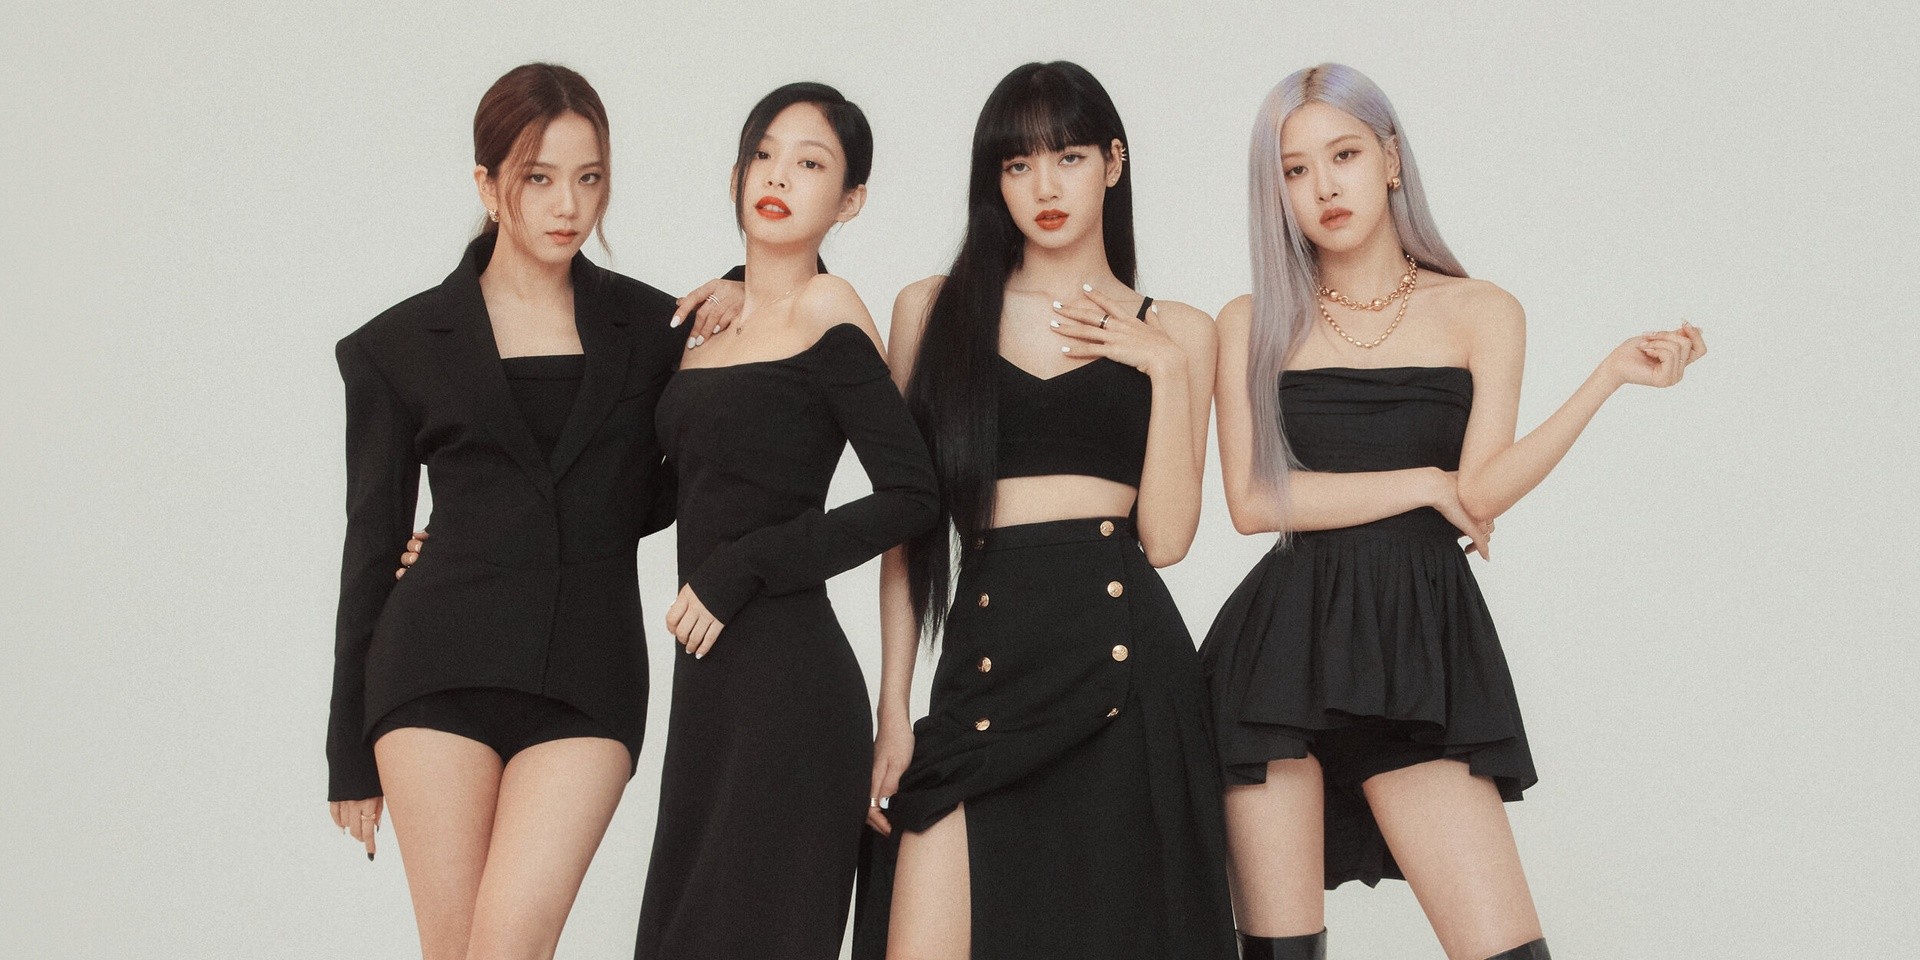 BLACKPINK to return with new music this August, reveal world tour plans